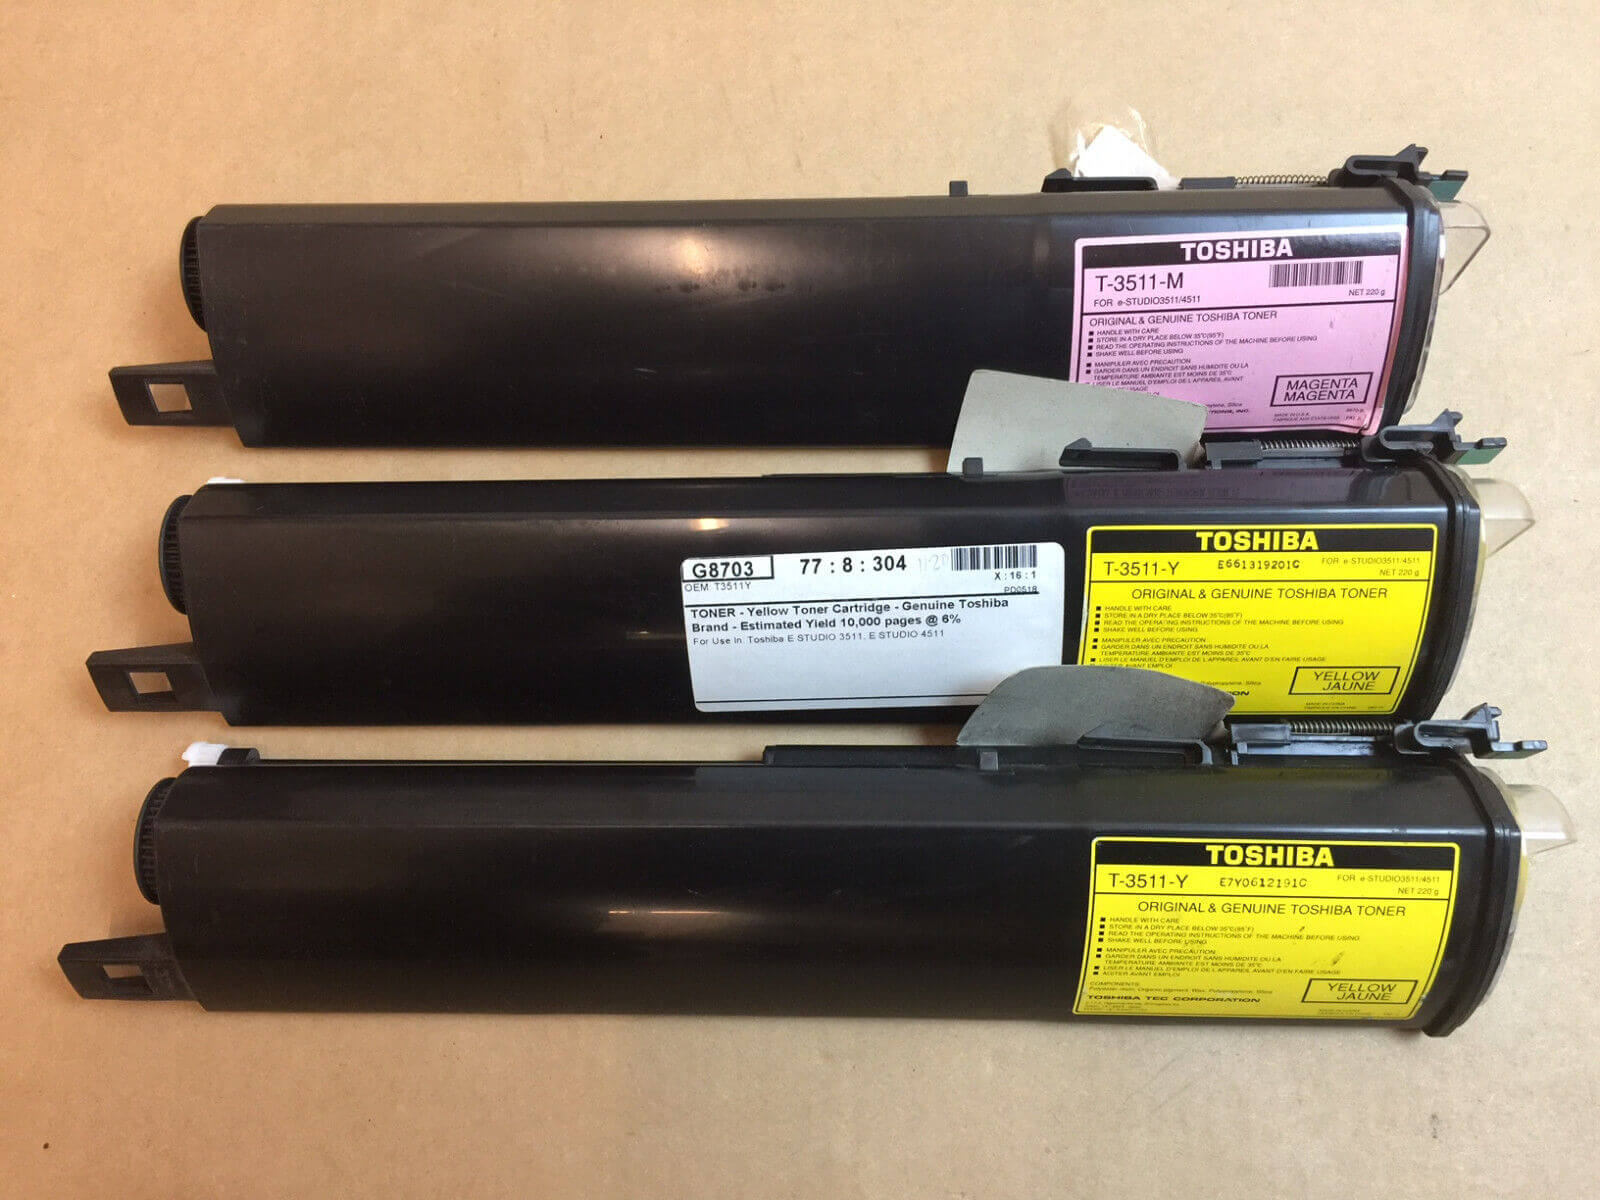 Toshiba T-3511 (M,Y) Toner Cartridges for e-Studio 3511/4511 SAME DAY SHIPPING!! - copier-clearance-center